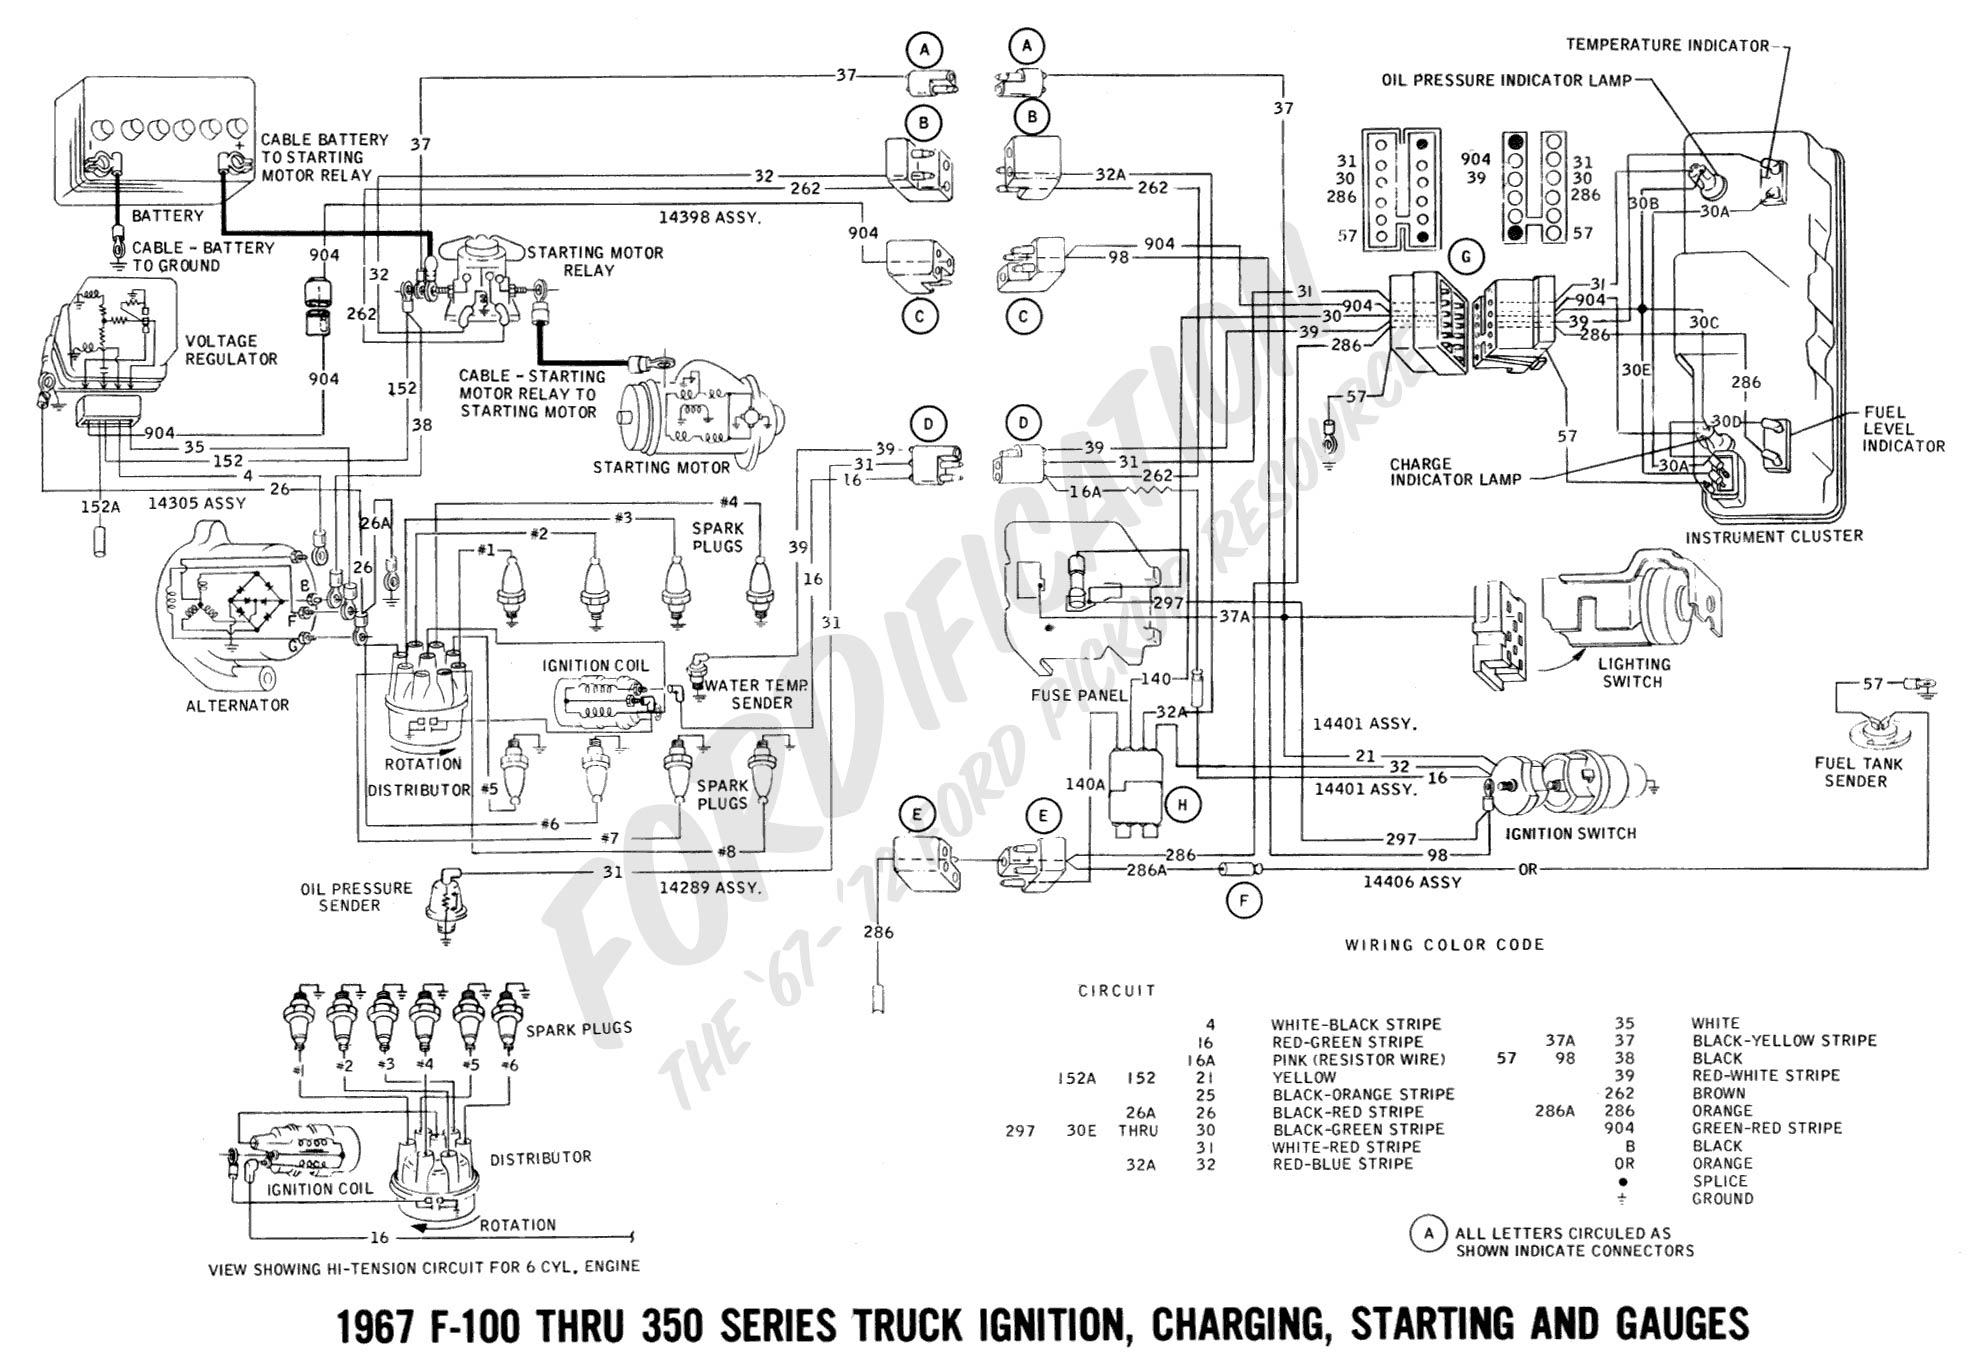 Ford Truck Technical Drawings and Schematics - Section H - Wiring Diagrams  Wiring Diagram For 1971 Ford F100    FORDification.com